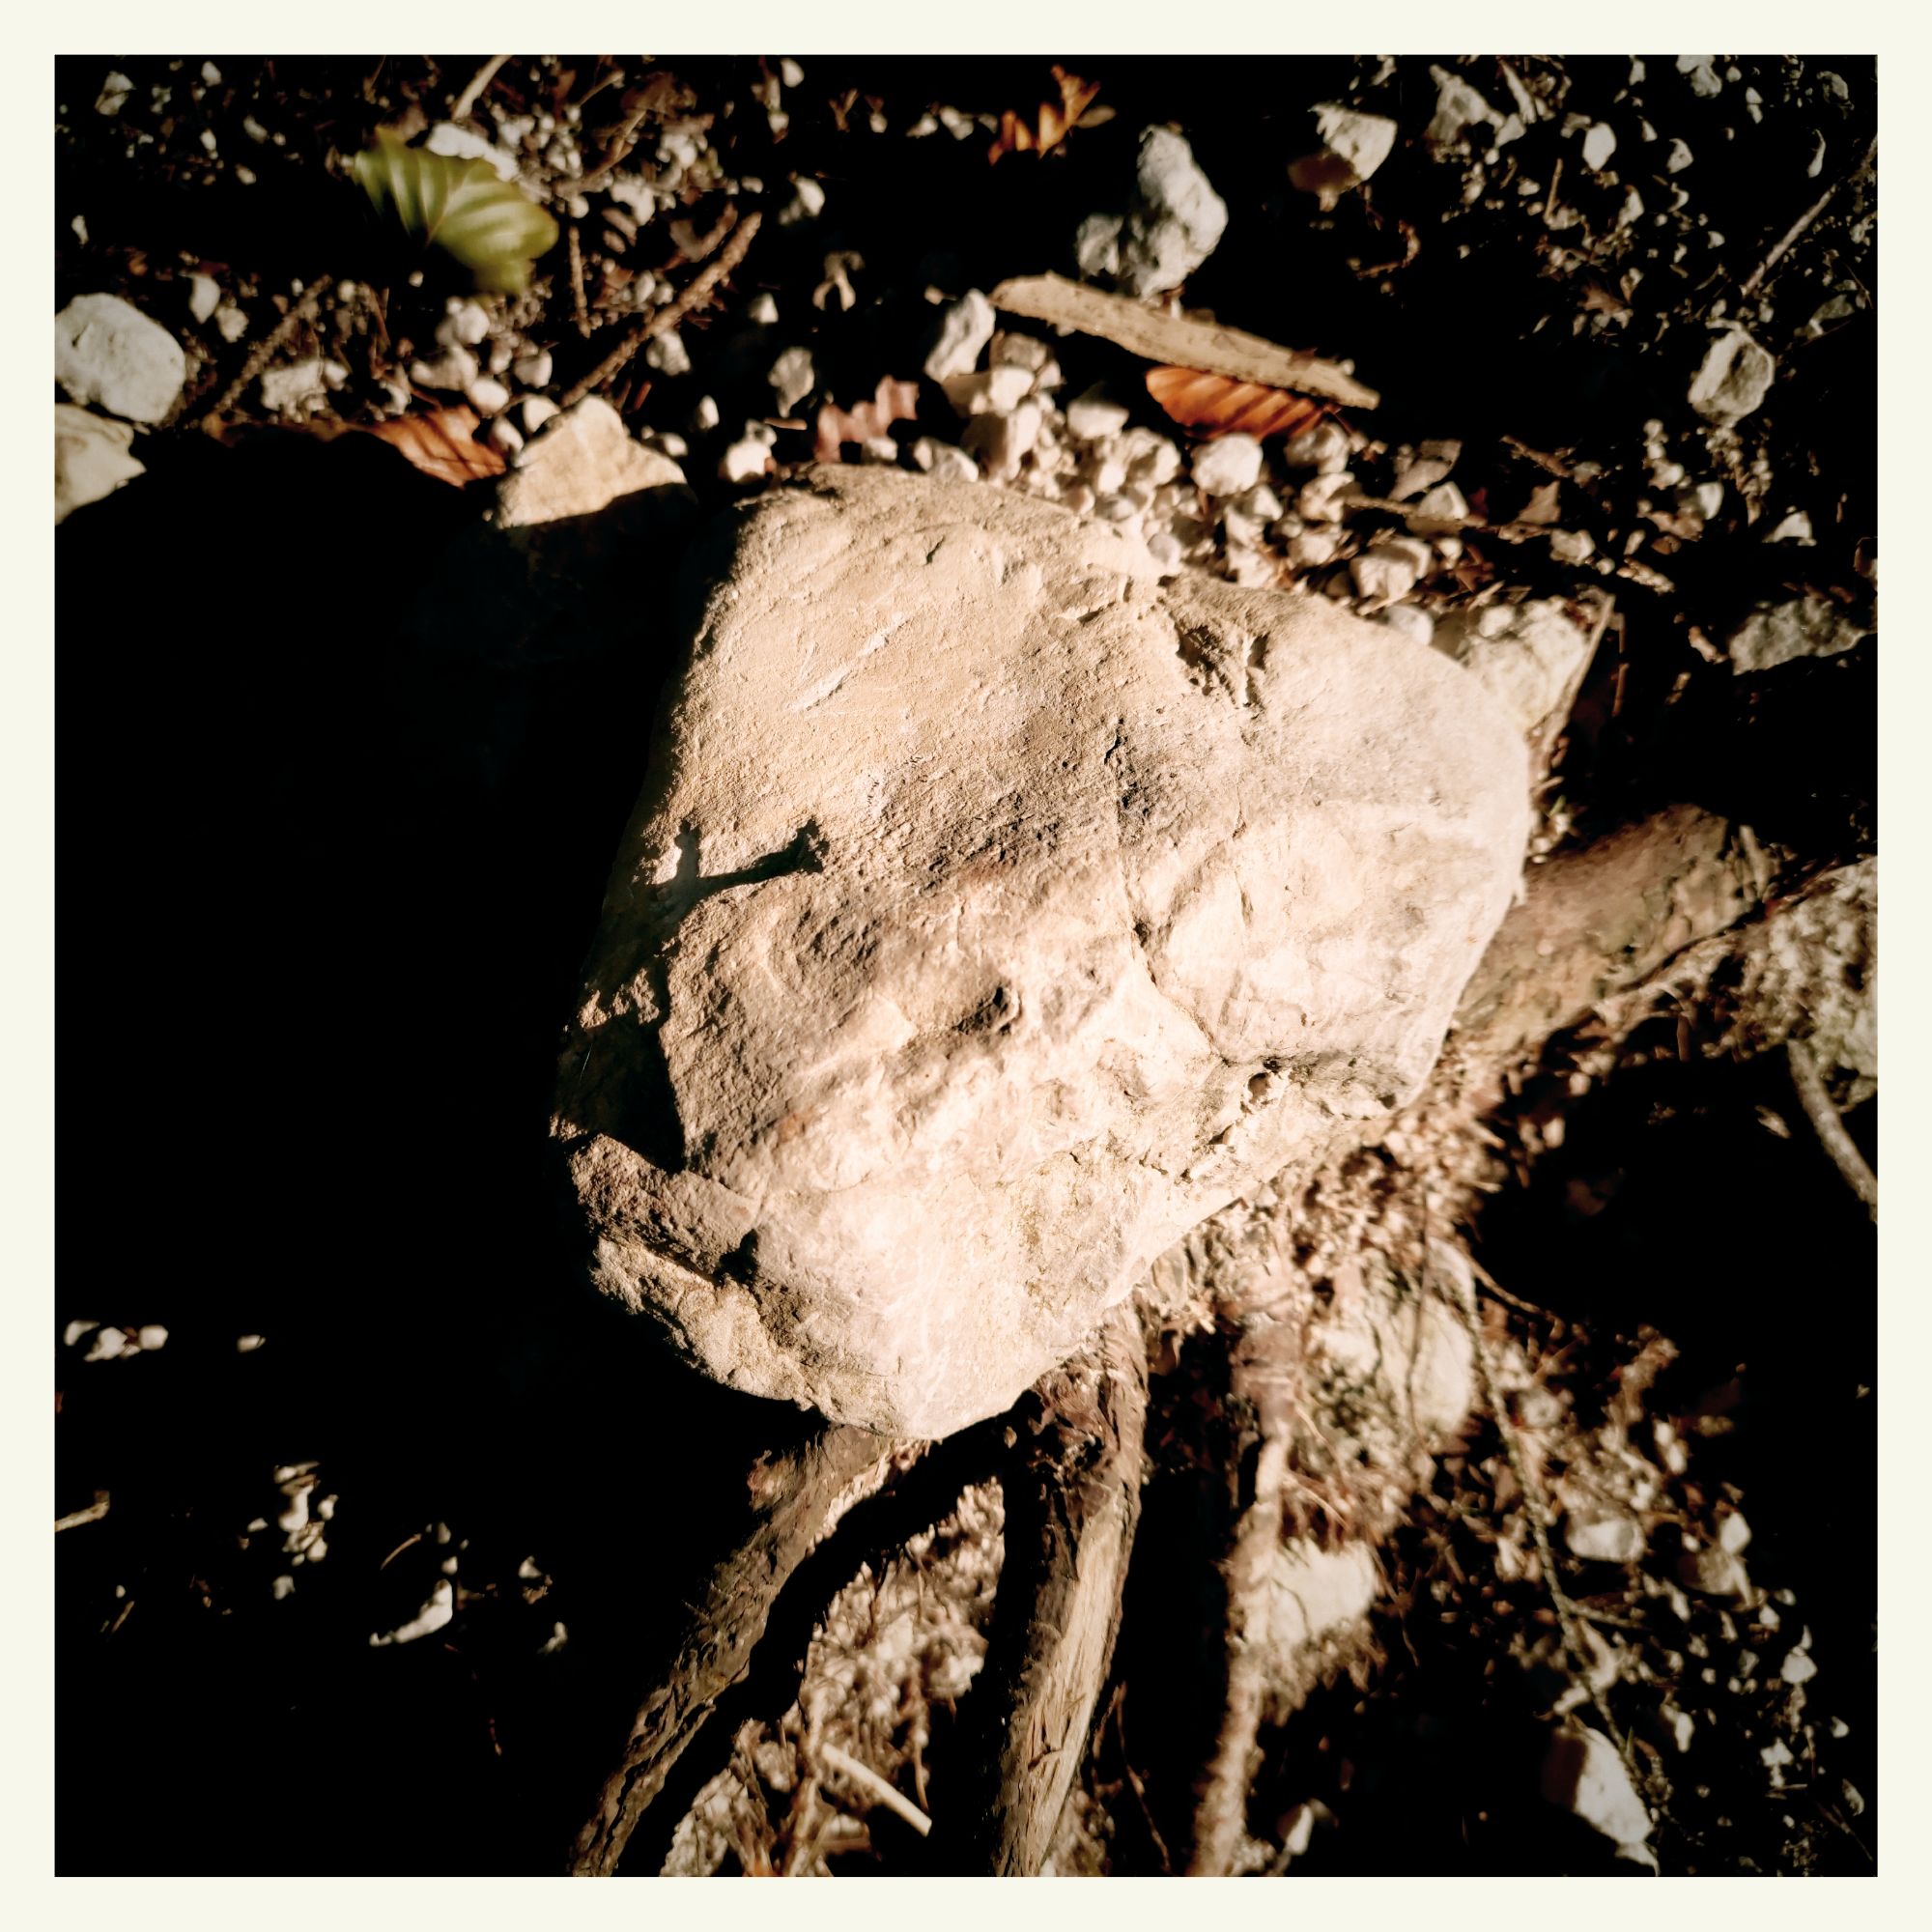 Another mountain rock in afternoon sun.